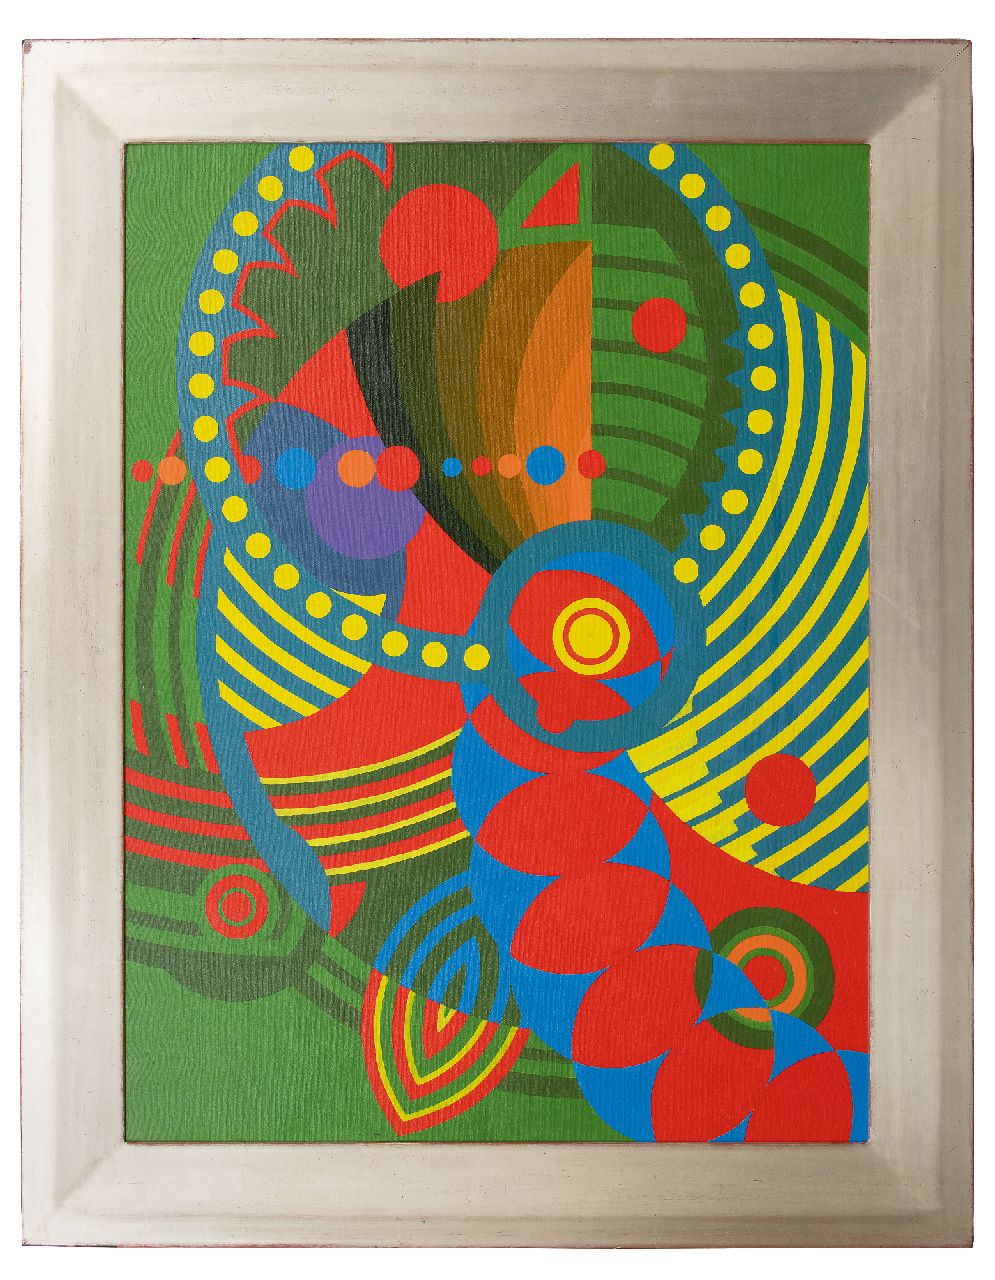 Justice J.  | Jack Justice | Paintings offered for sale | Parrot, oil on canvas laid down on board 121.5 x 90.0 cm, signed verso on tape and dated 8/8/1966